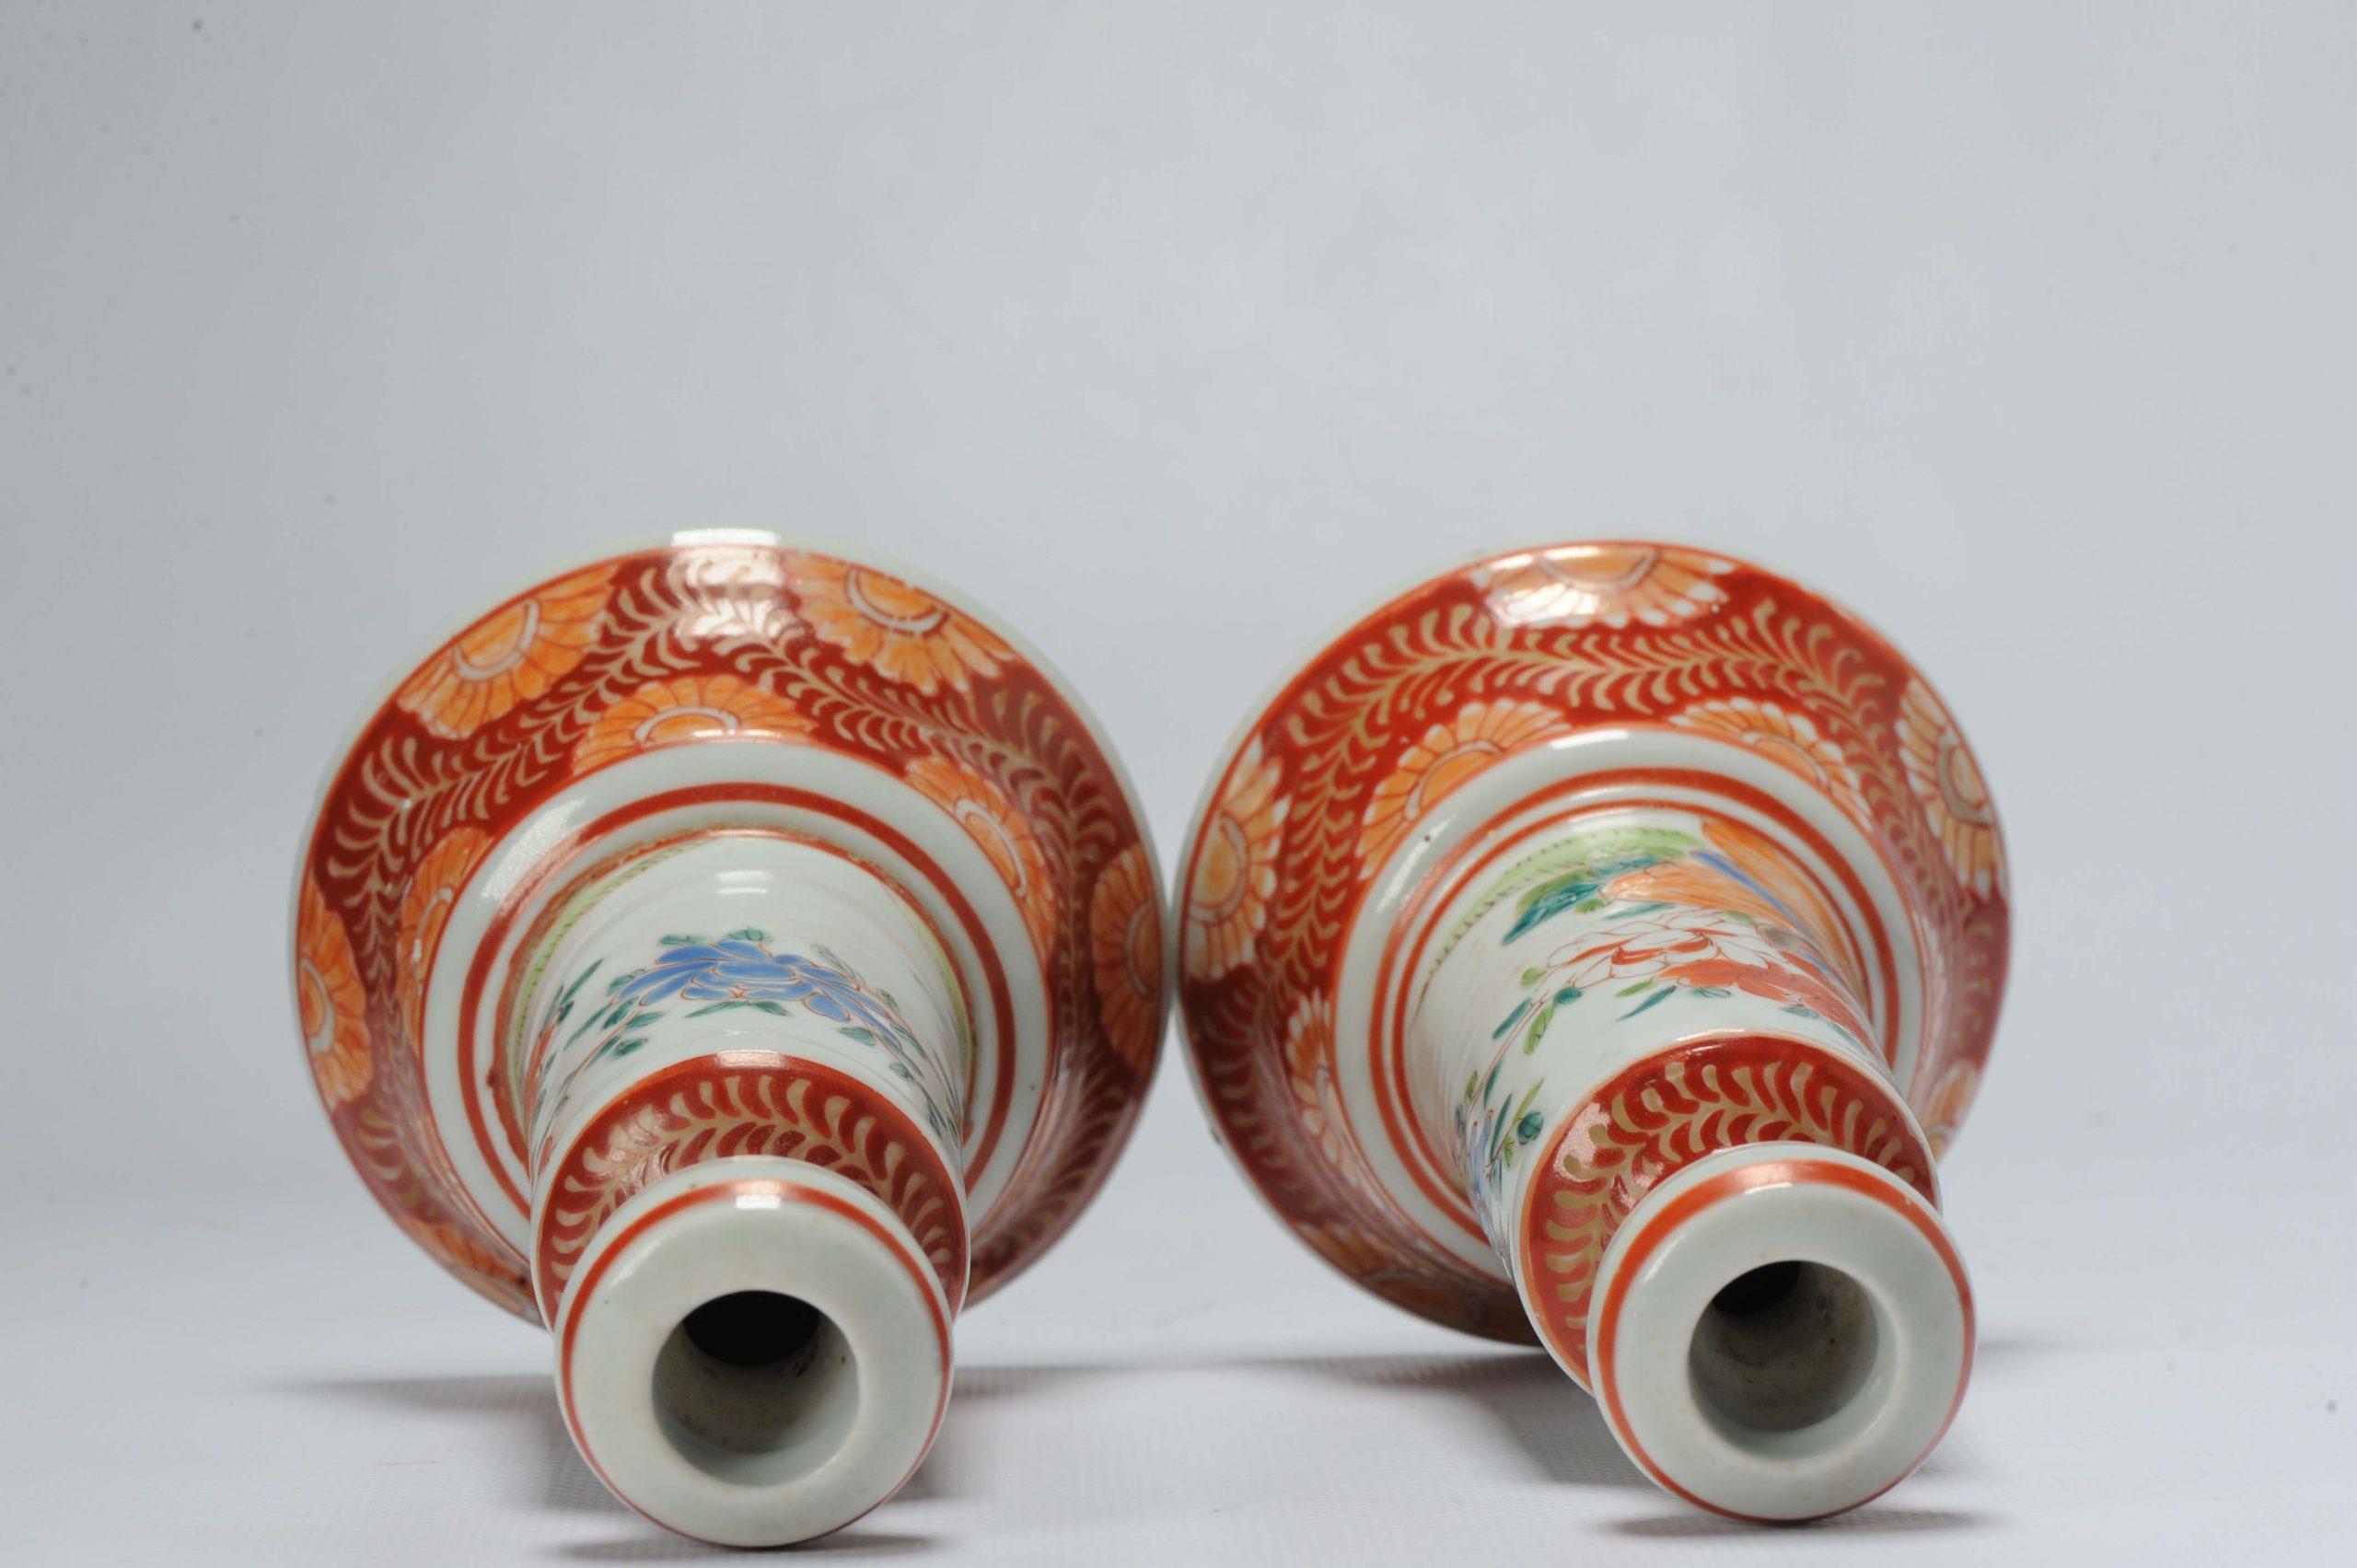 Pair of Antique Candle Sticks Set of Hichozan Japanese Arita Porcelain, 19th Cen In Good Condition For Sale In Amsterdam, Noord Holland